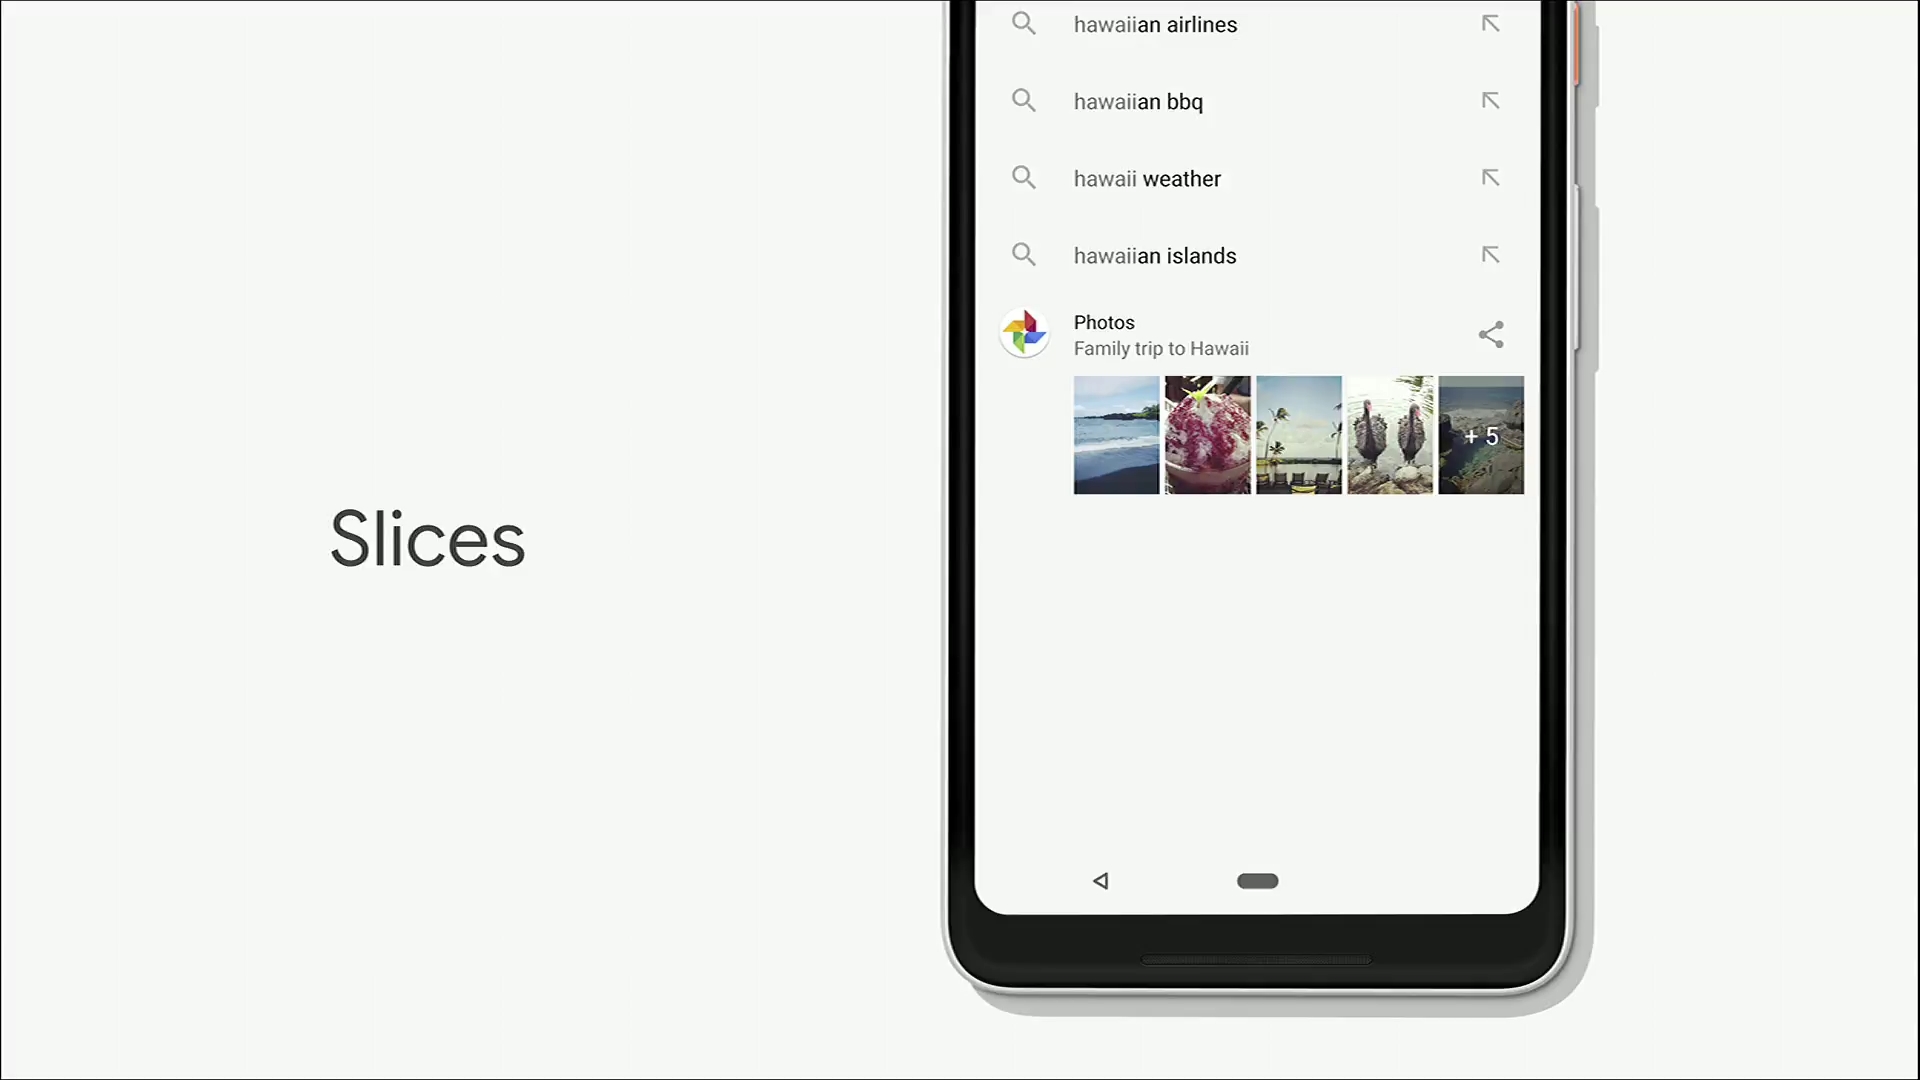 New Features of Android P